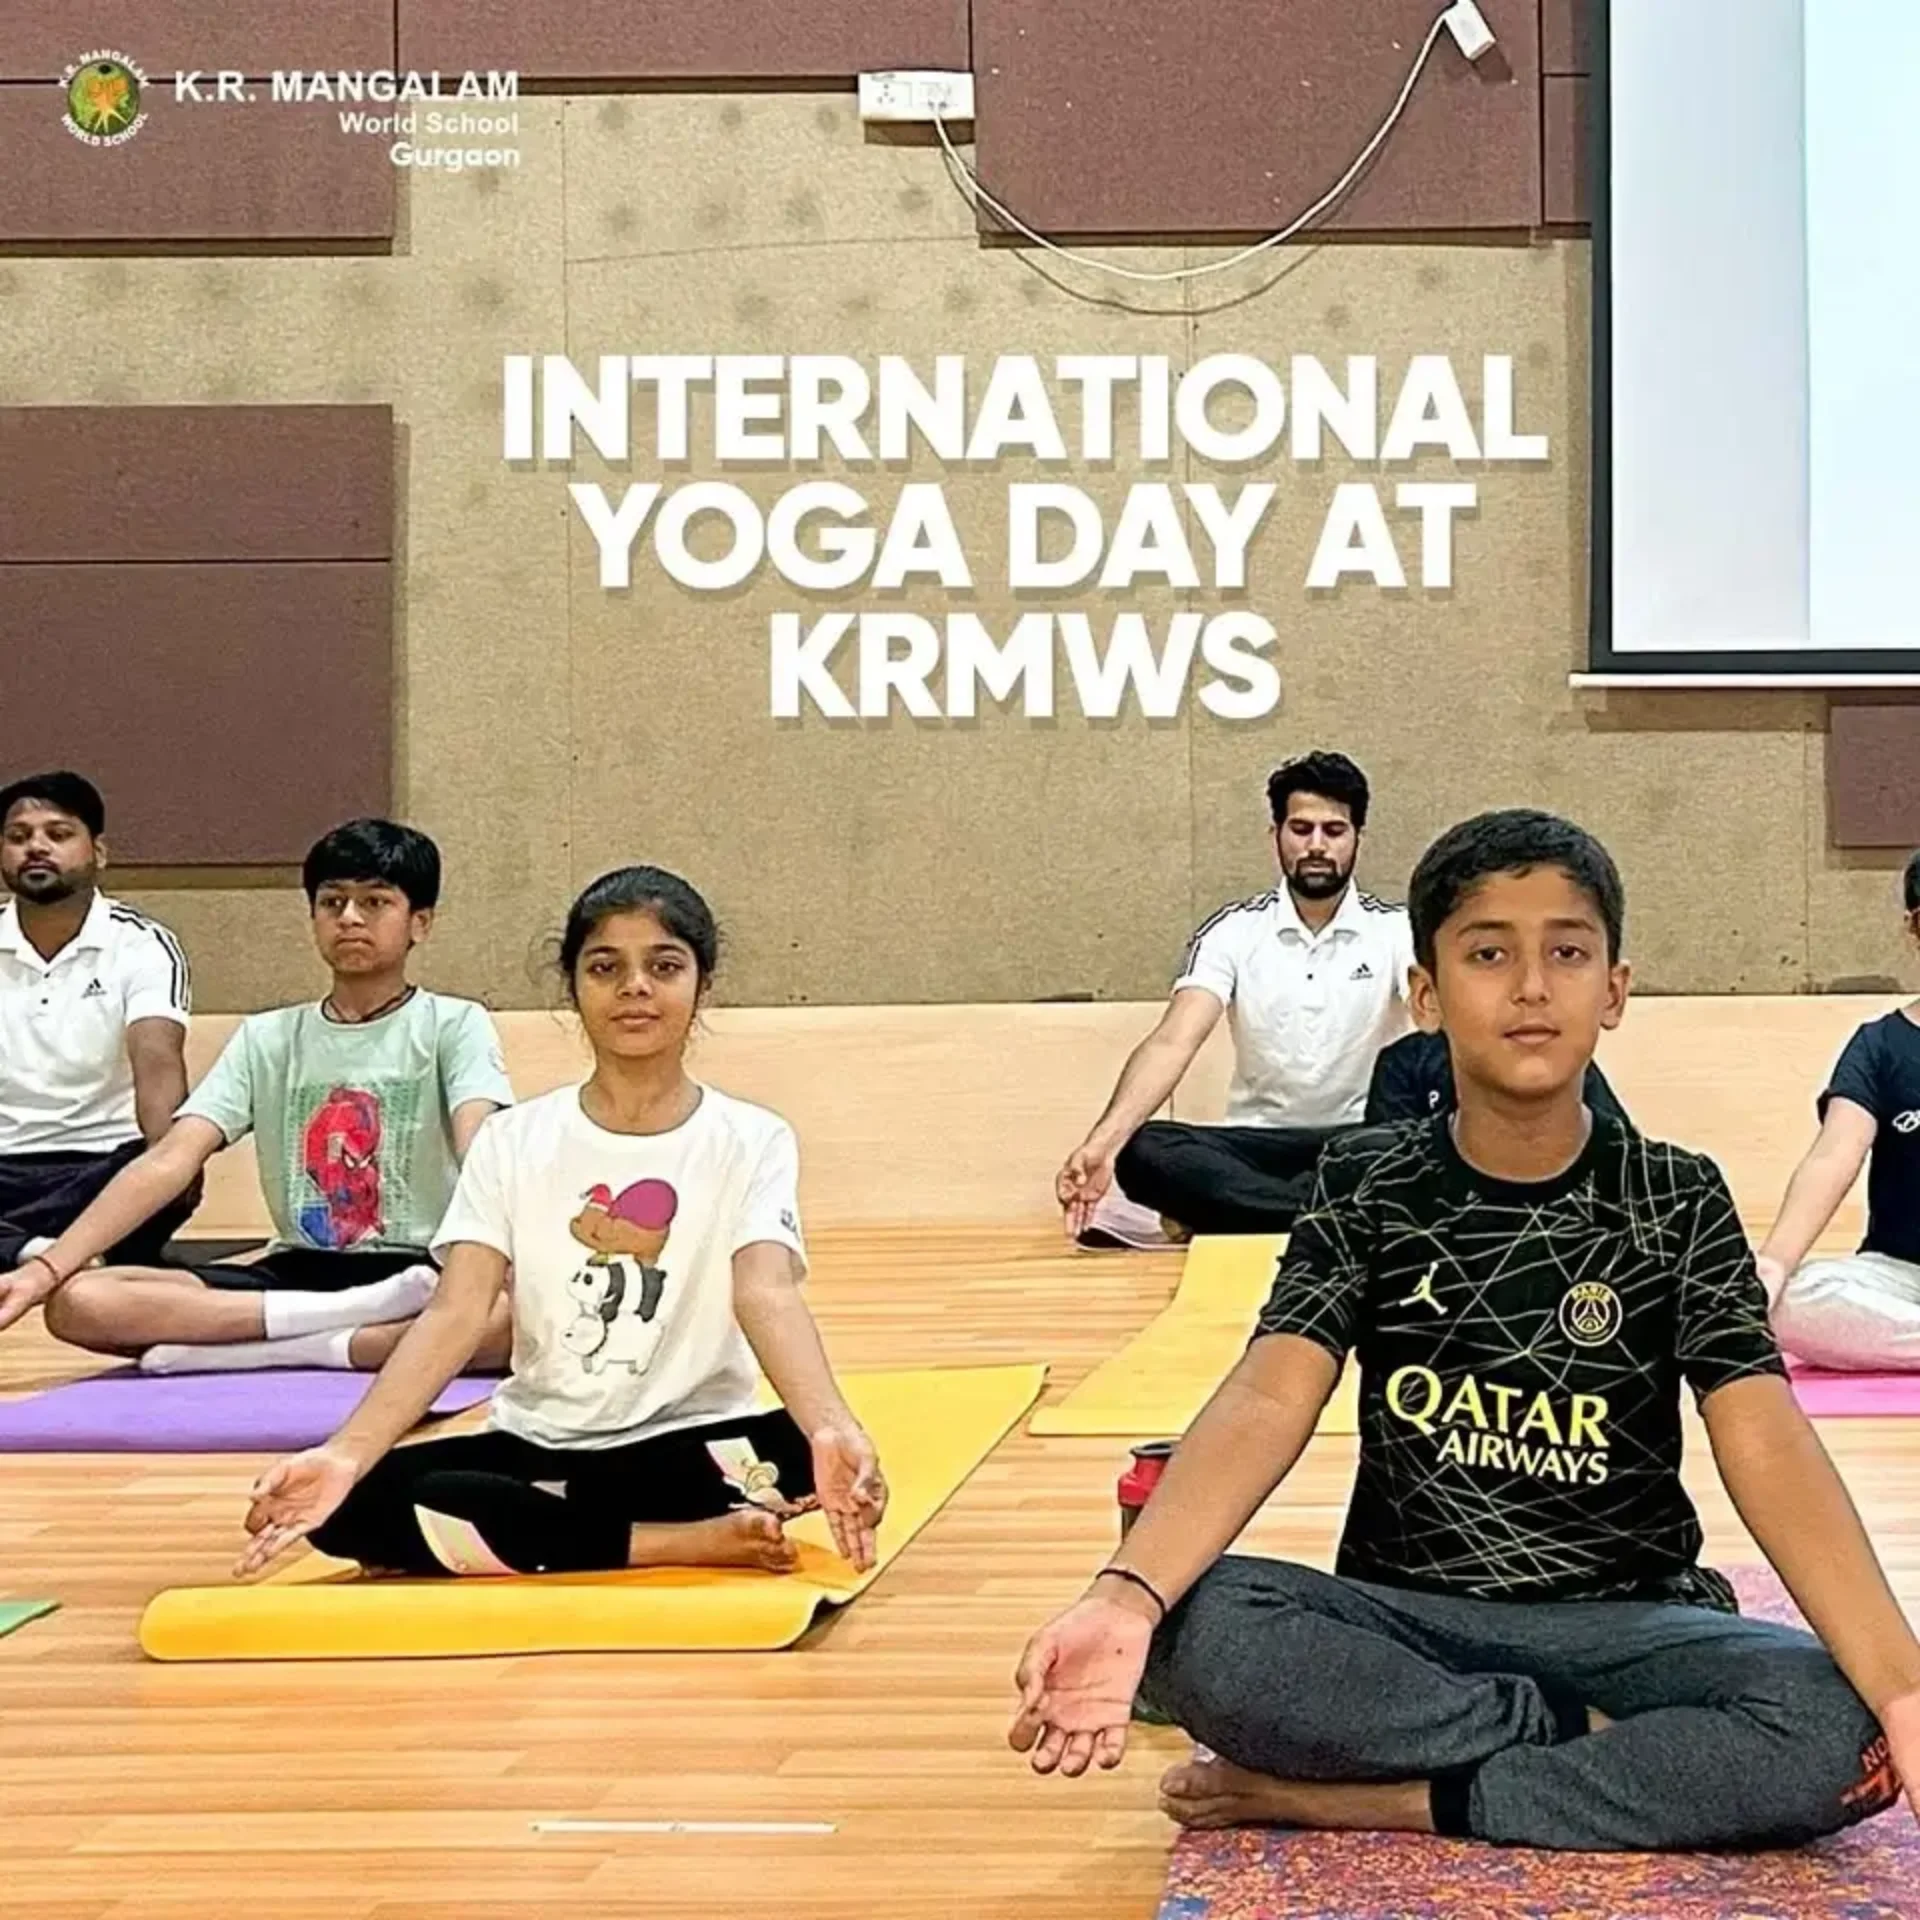 Students participated in the yoga session organized at school